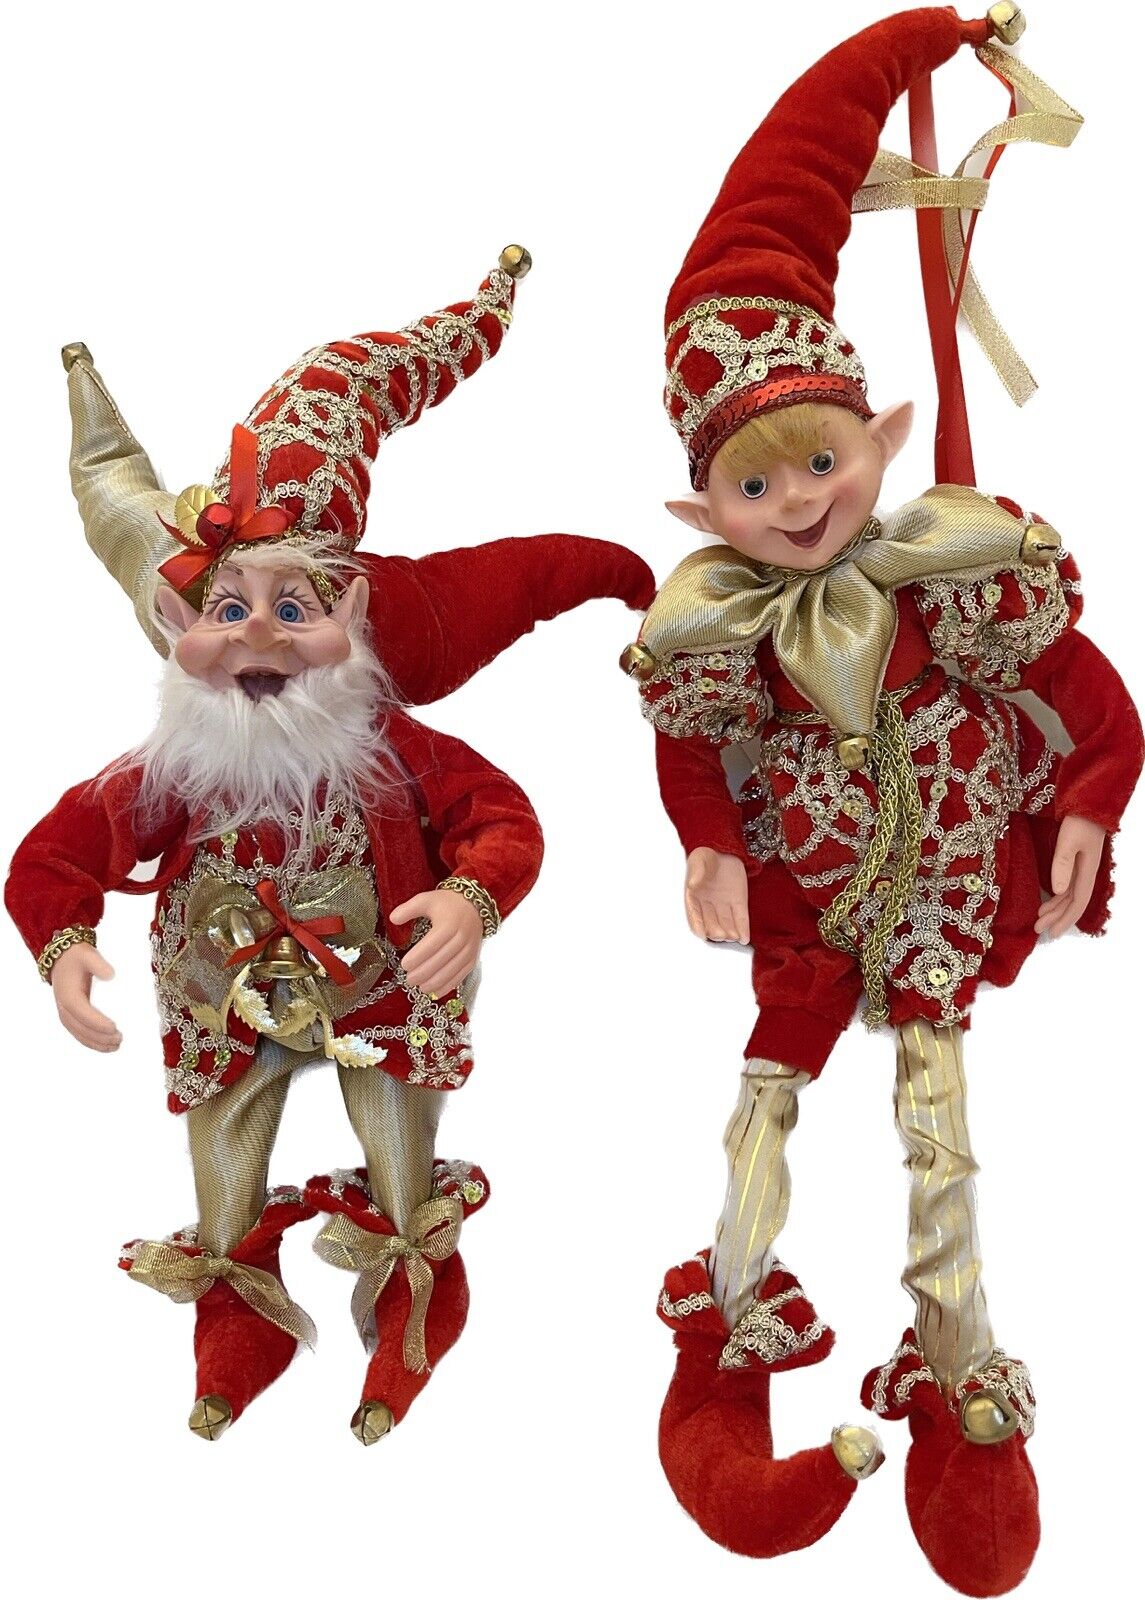 2PC Set - Christmas Handmade Holiday Posable Elves And Jester Figurines / Dolls